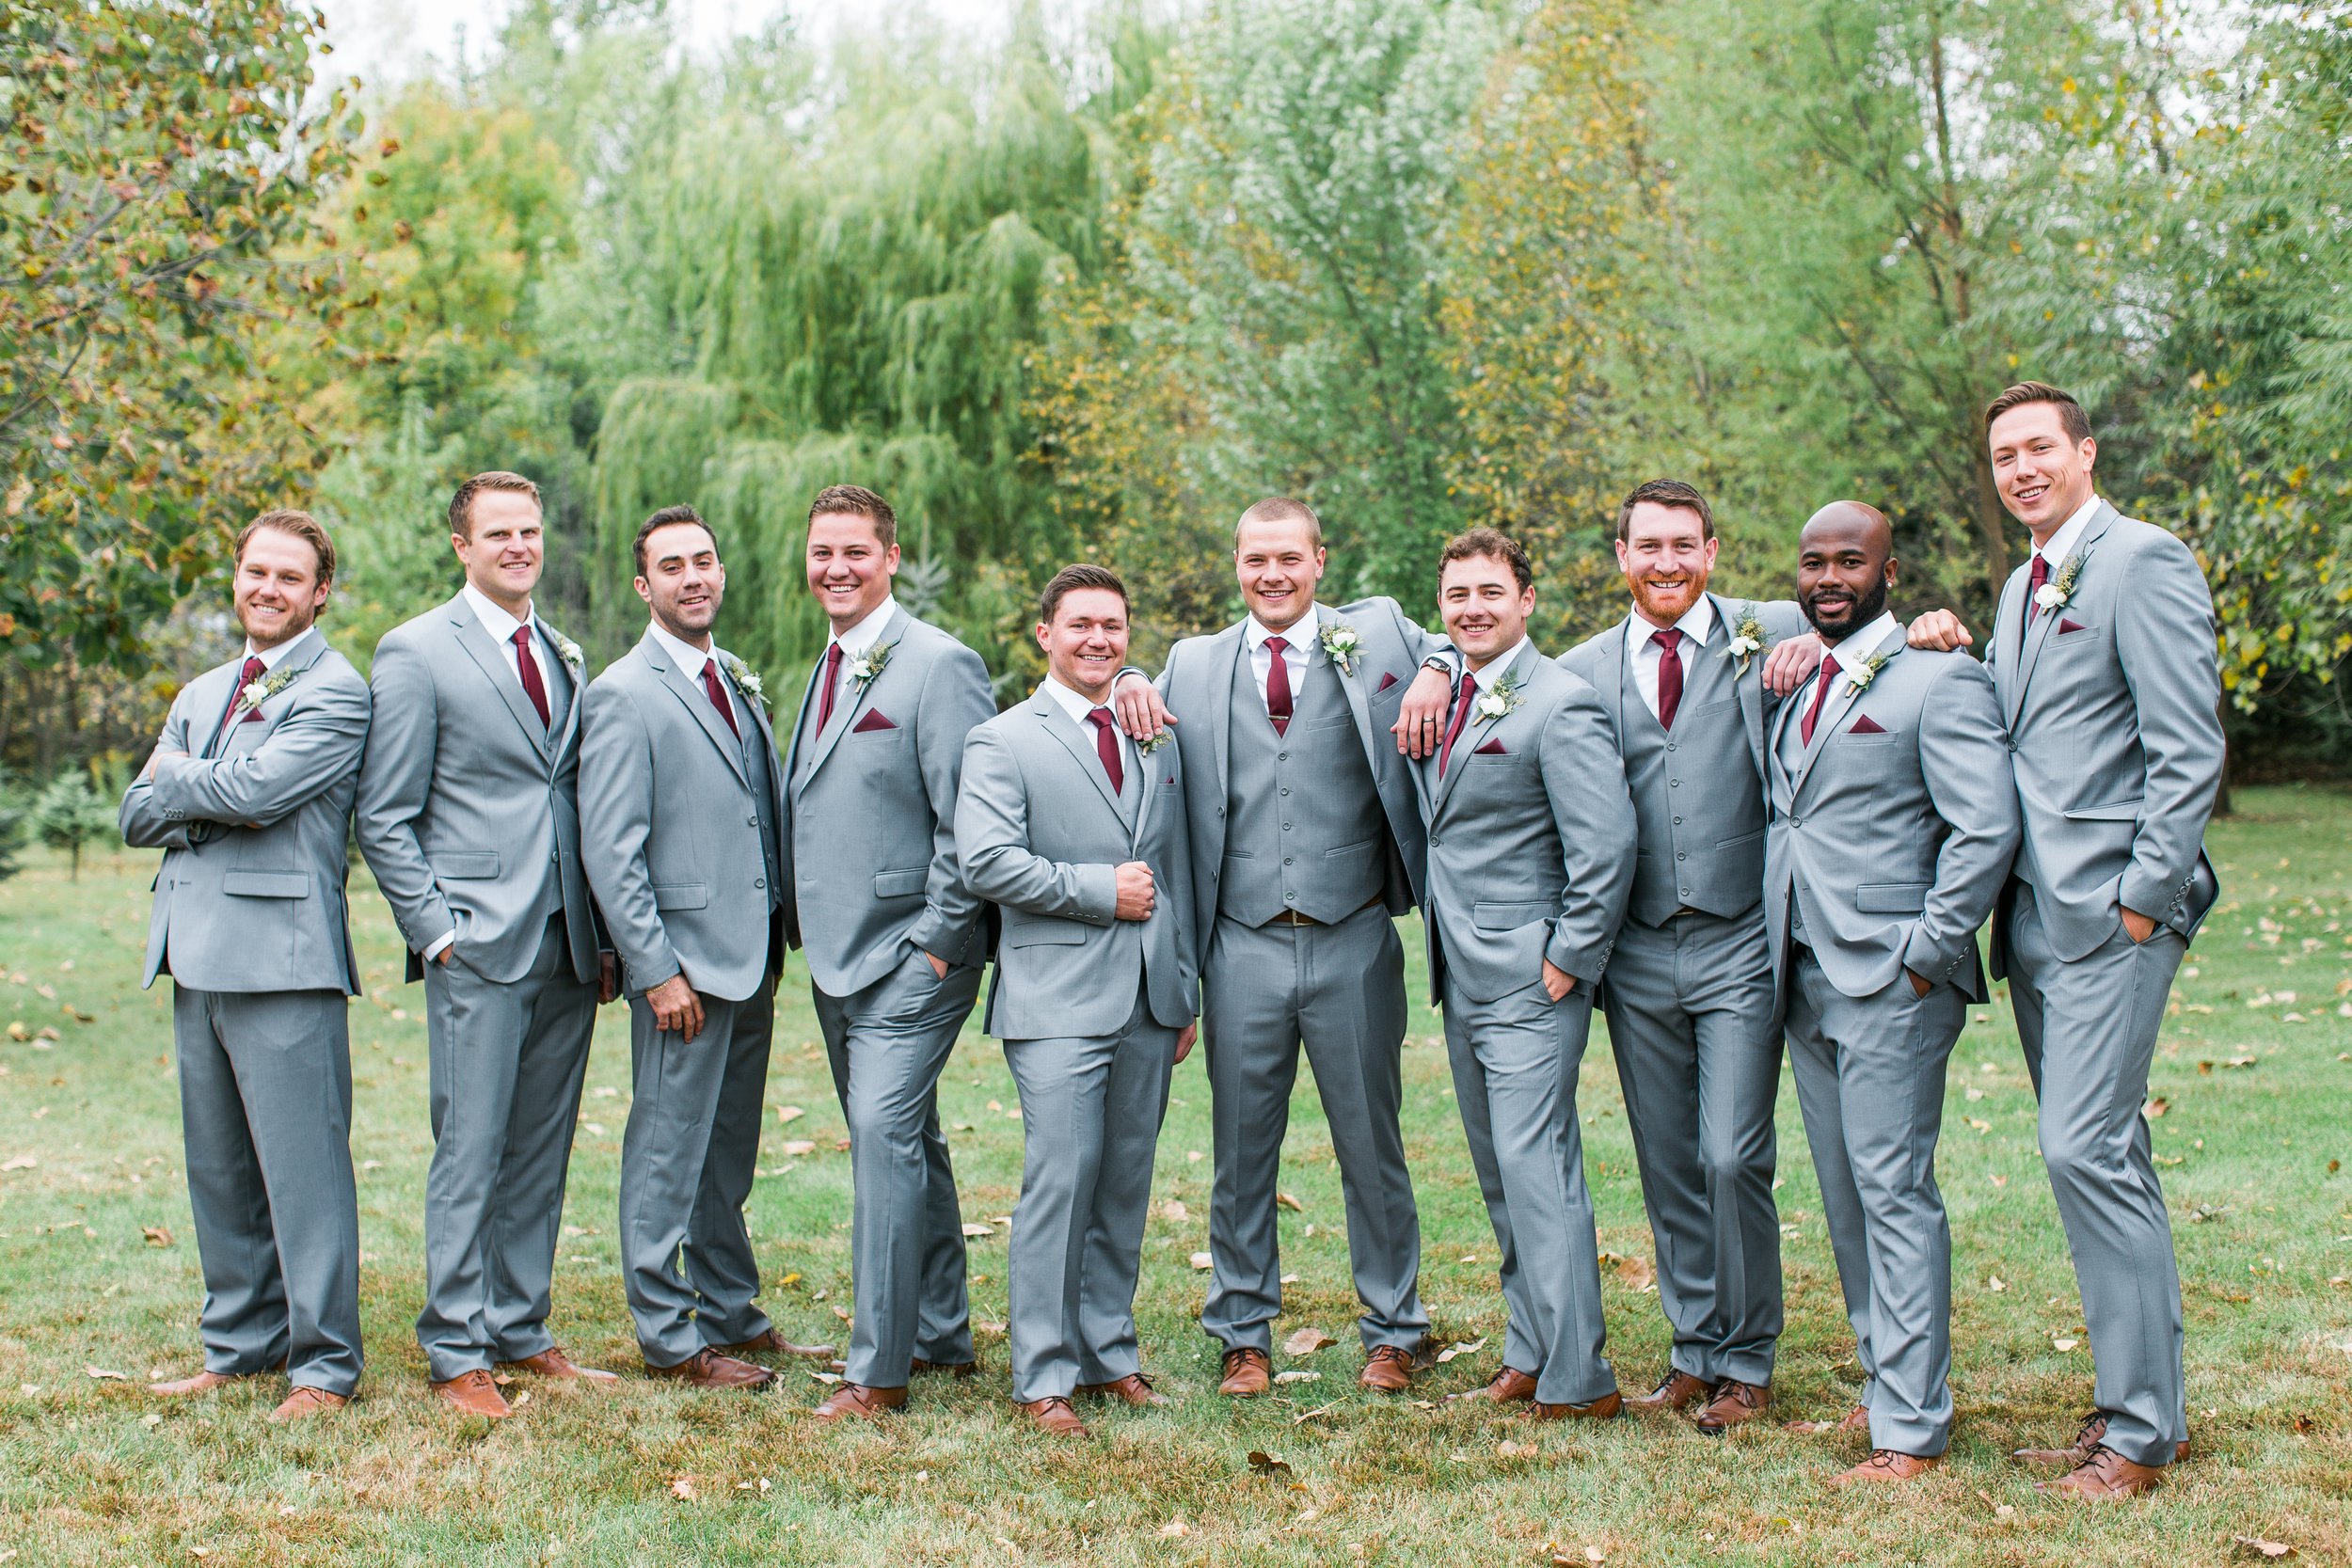 Groomsmen in gray suits with burgundy accents casual pose Minnesota backyard fall wedding Minnesota wedding photography Mallory Kiesow Photography